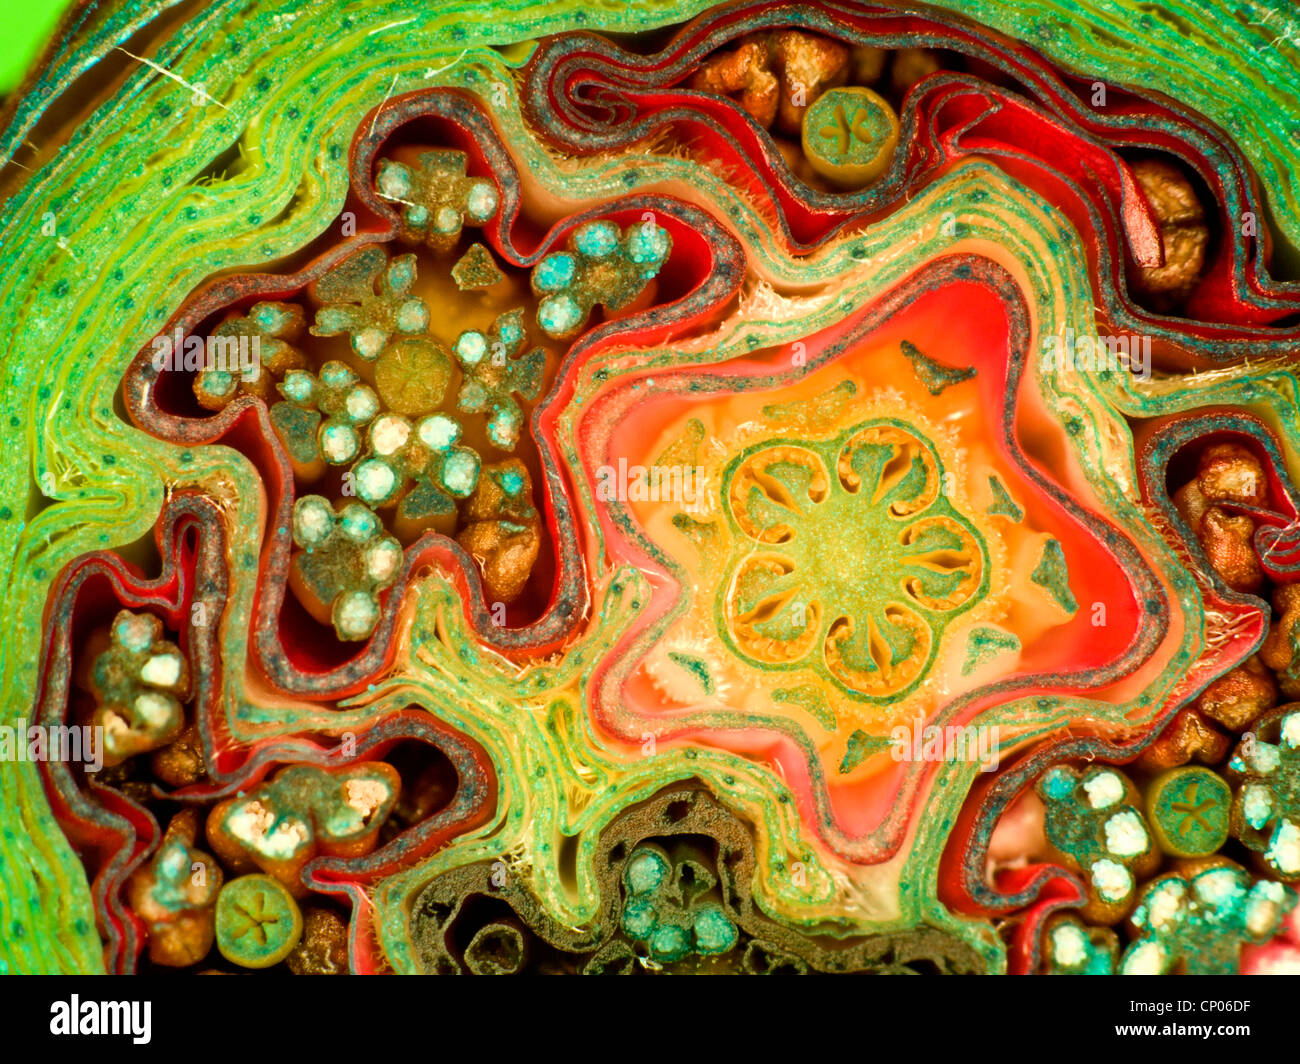 rhododendron (Rhododendron spec.), cross section of a flower bud of an rhododendron, not dyed Stock Photo